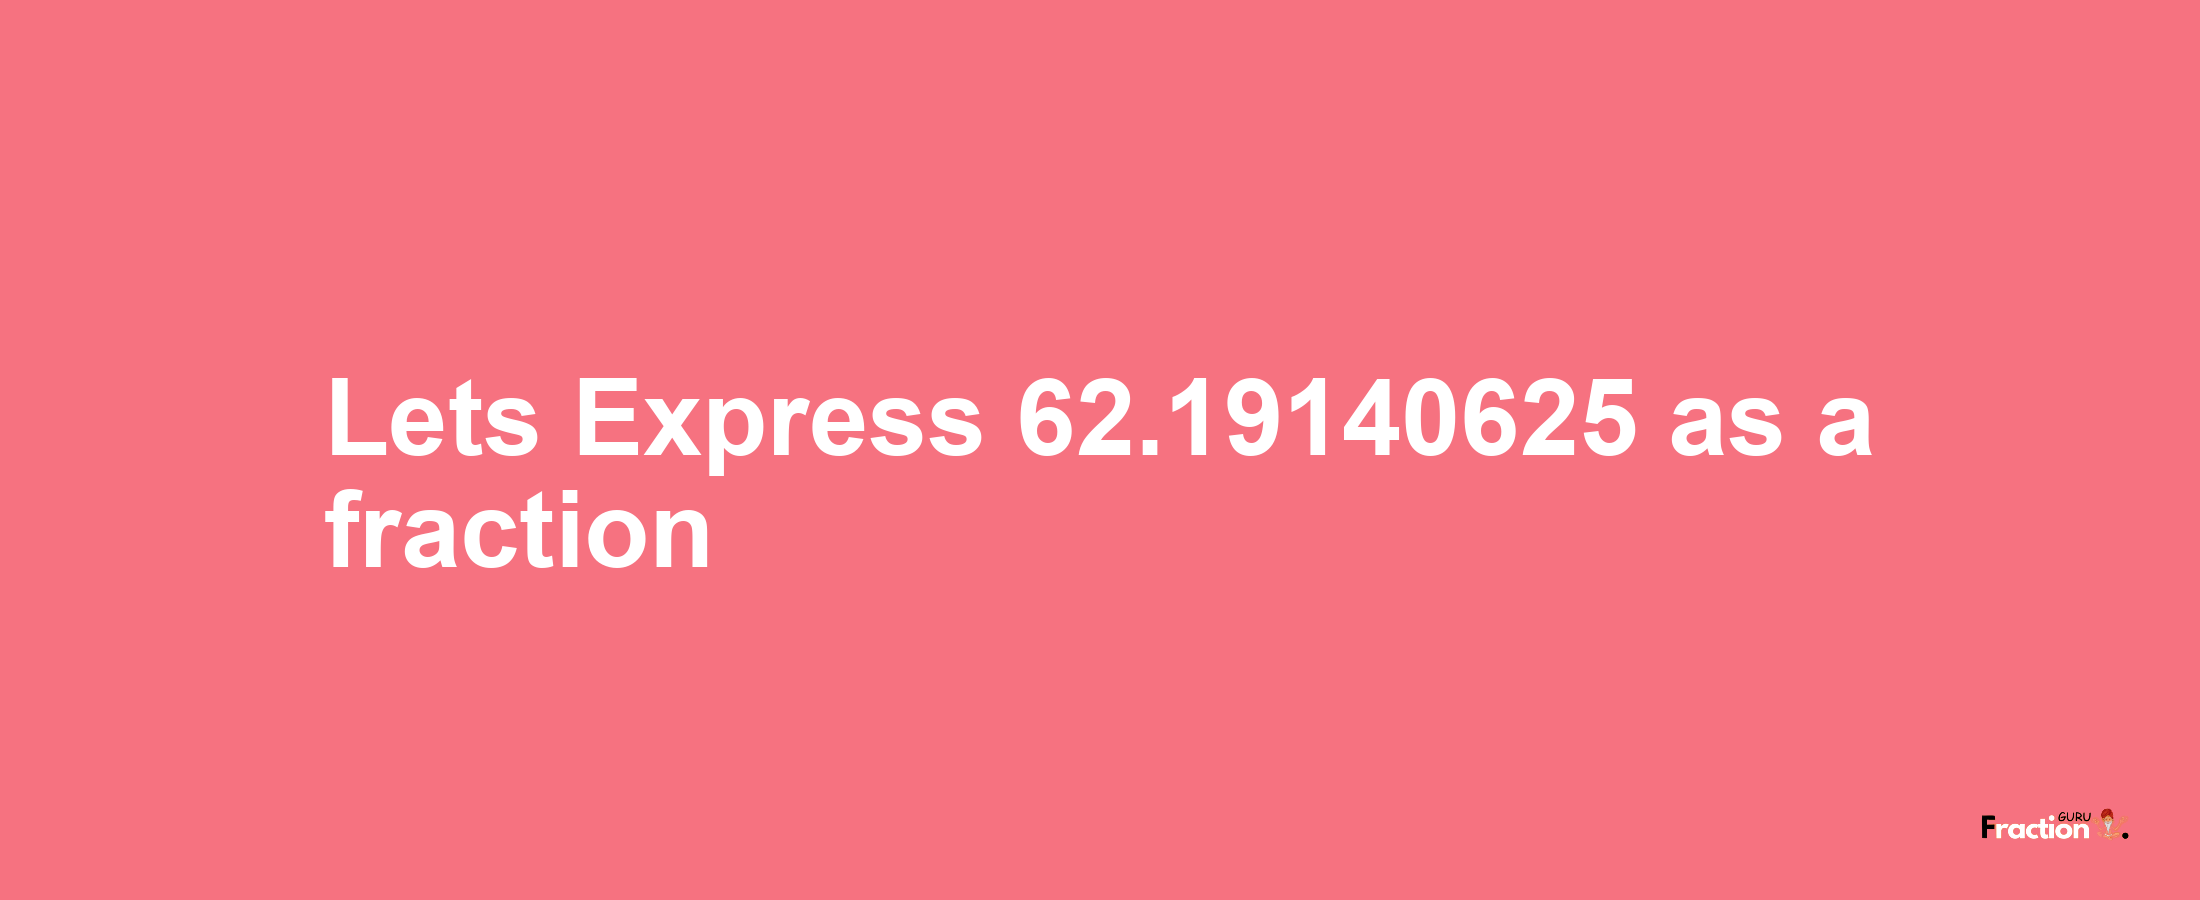 Lets Express 62.19140625 as afraction